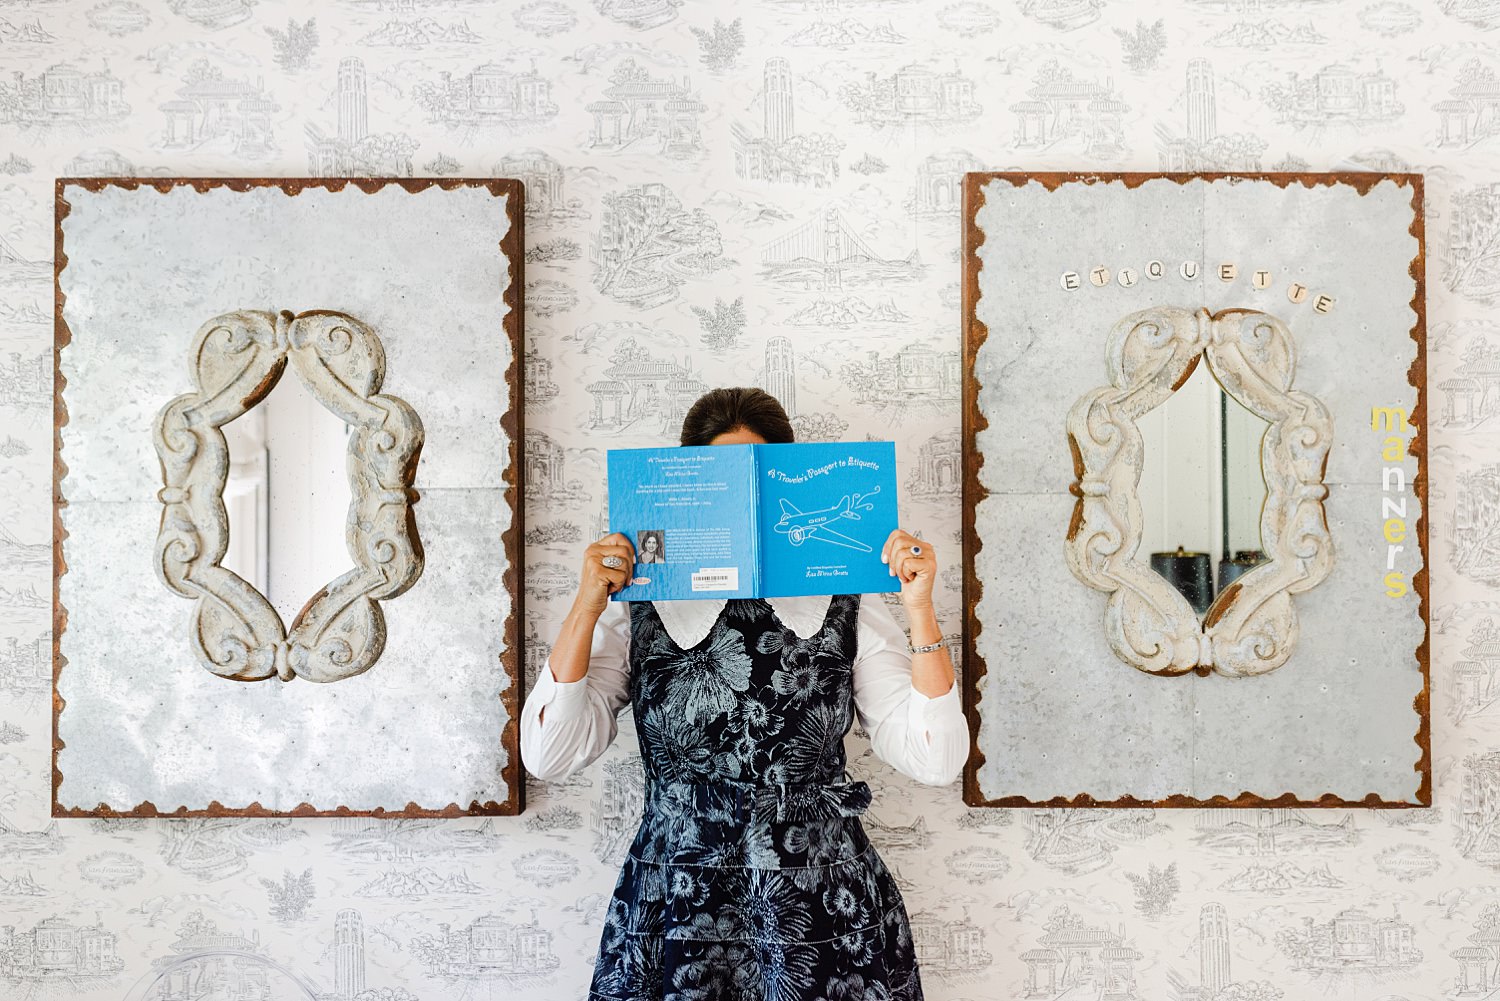 Woman in dark floral dress is holding an open book up to hide her face. She is standing between two artworks with mirrors in the center, the one on her left has the words "etiquette" and "manners" on it.